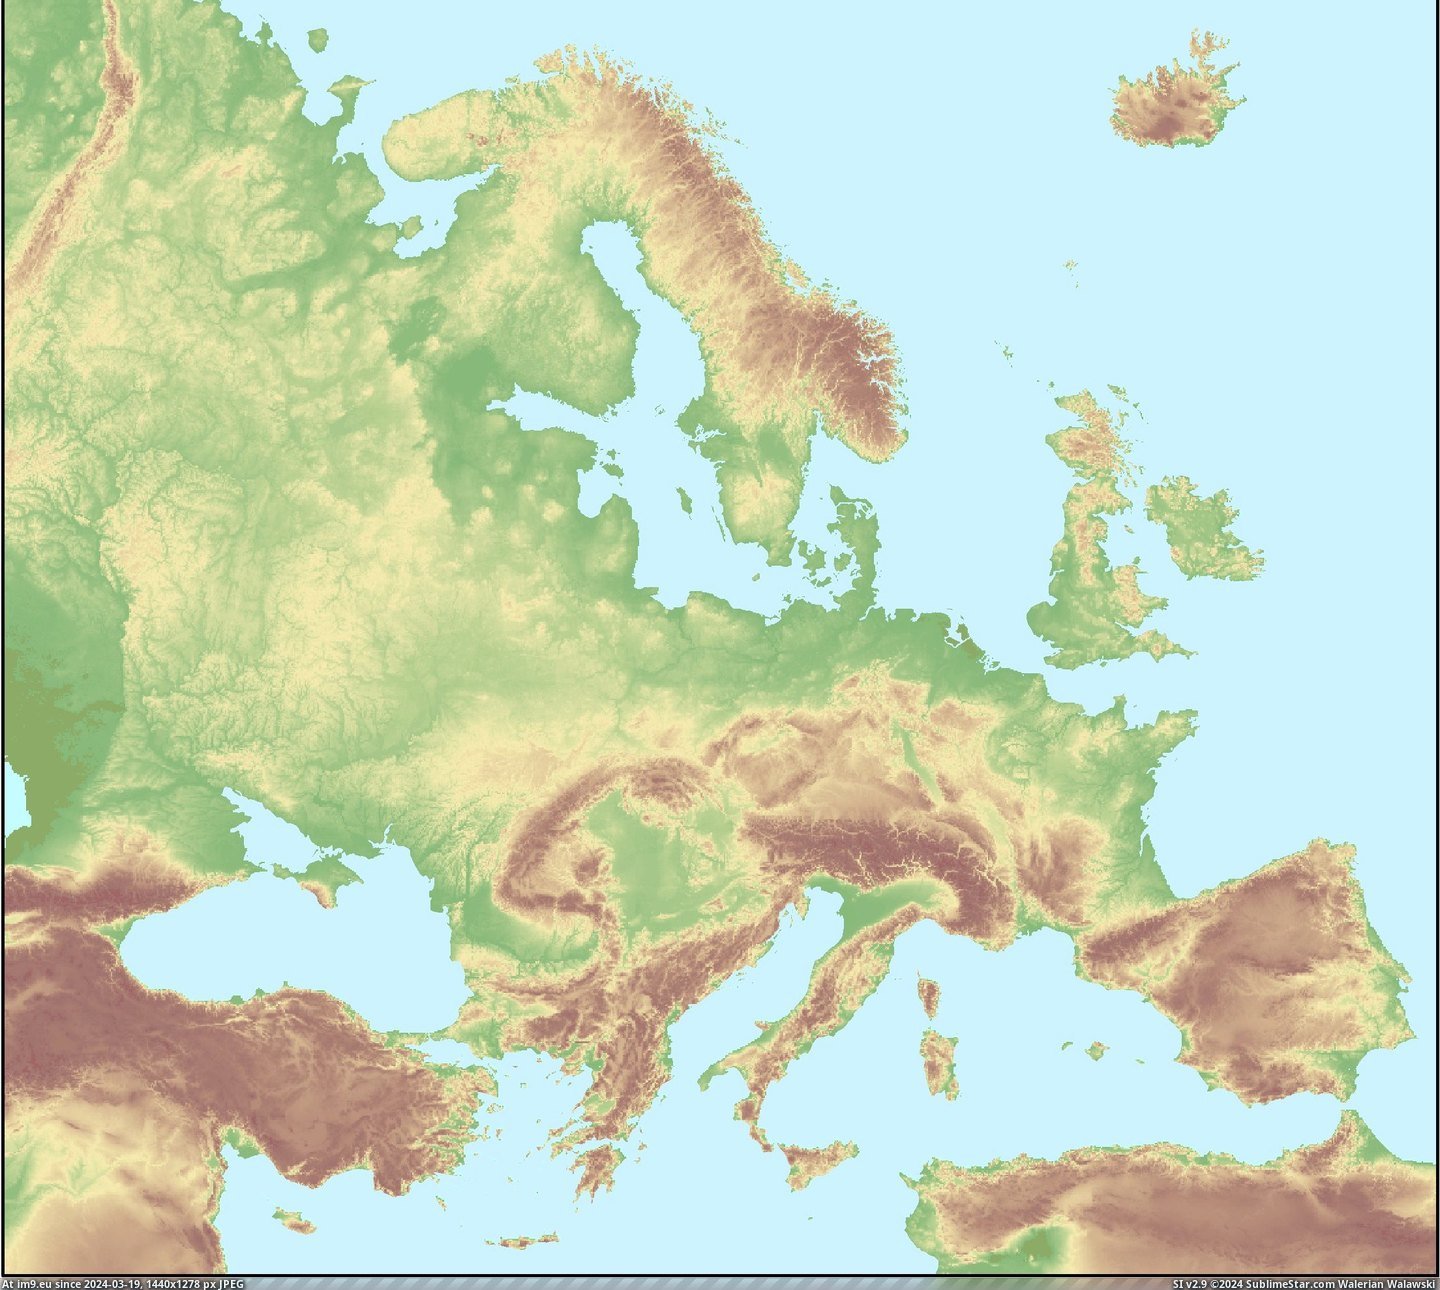  #Europe  [Mapporn] Europe backwards [2,208x1,971] Pic. (Image of album My r/MAPS favs))